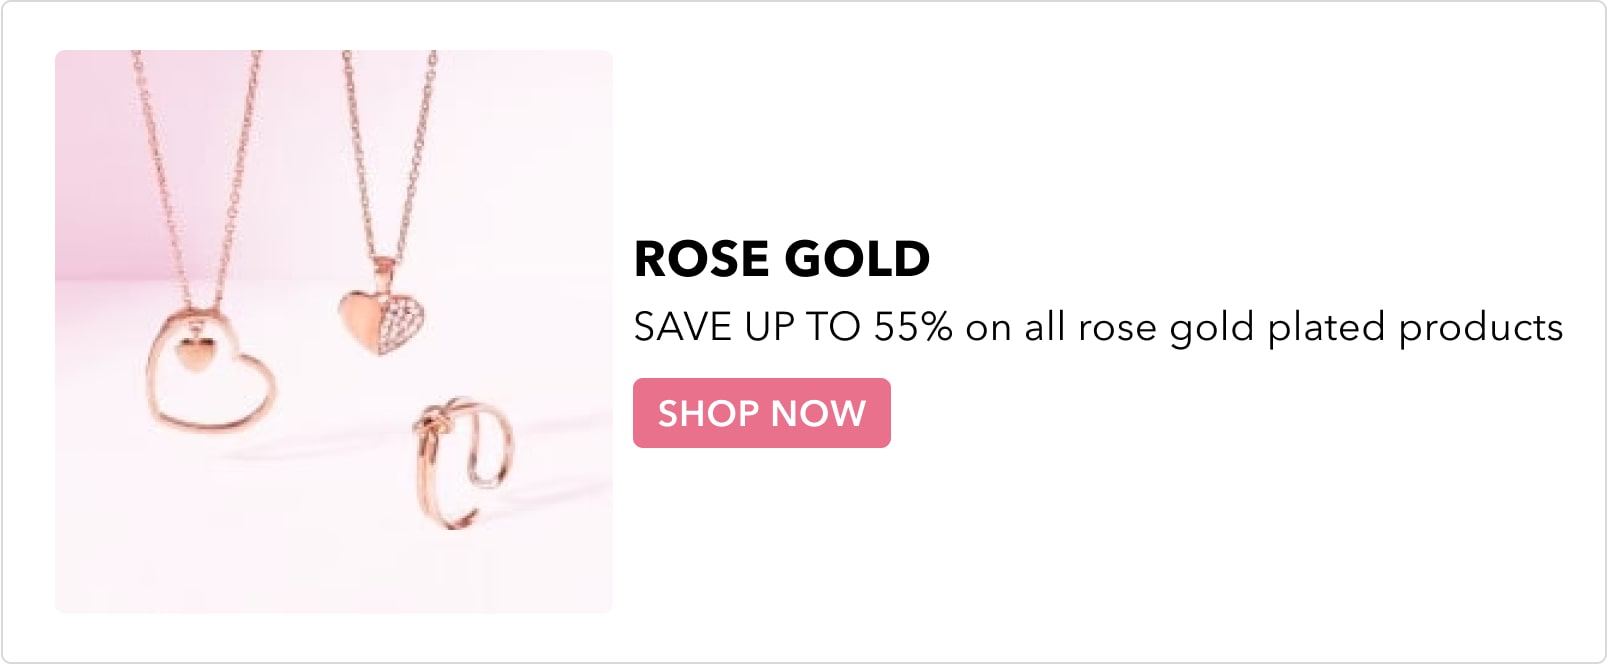 SAVE UP TO 55% on all rose gold plated products